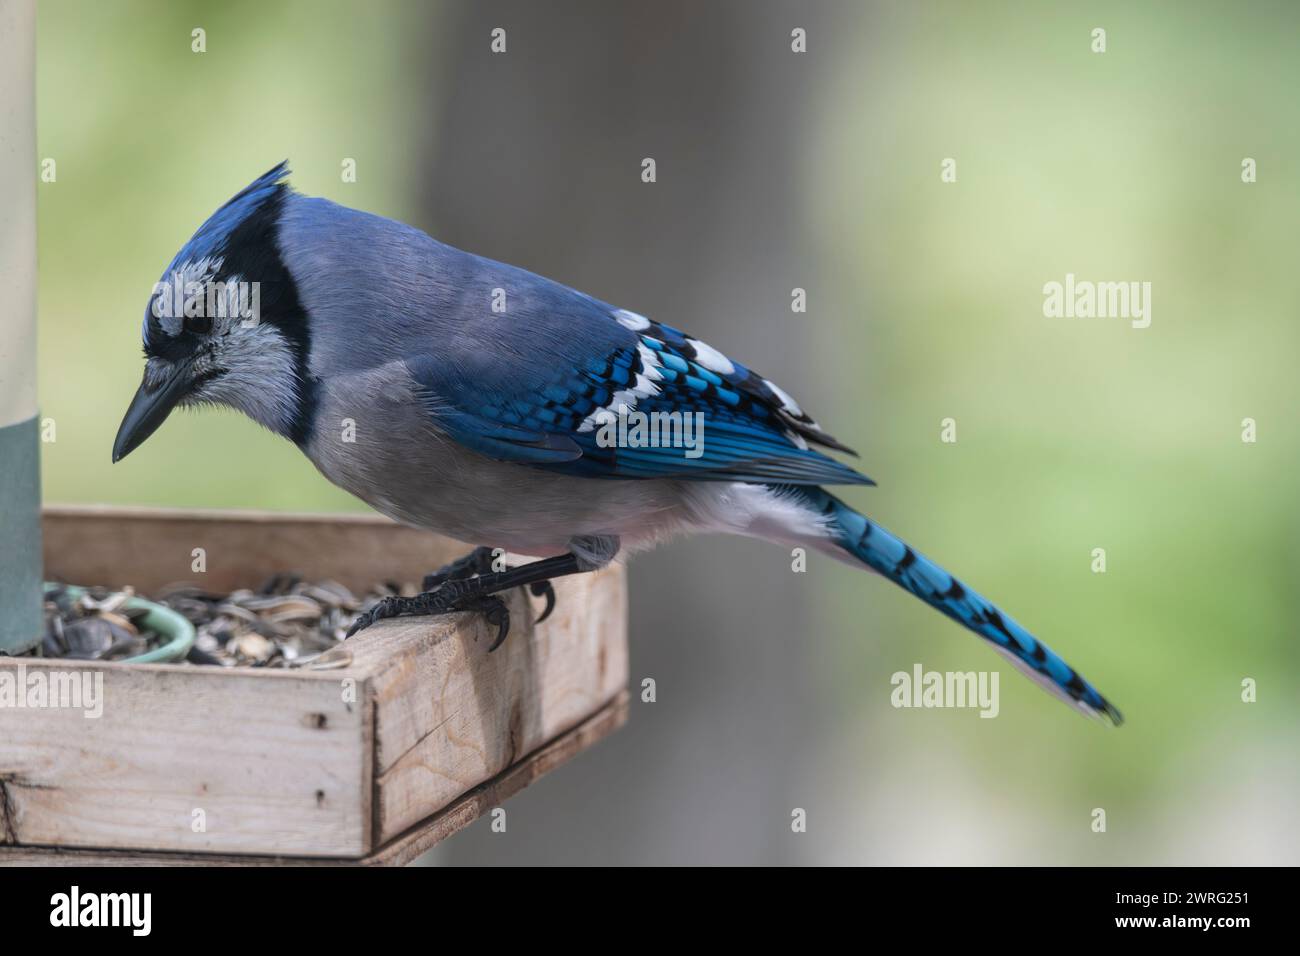 Blue jay perched at a bird feeder, Brownsburg-Chatham, Quebec, Canada Stock Photo